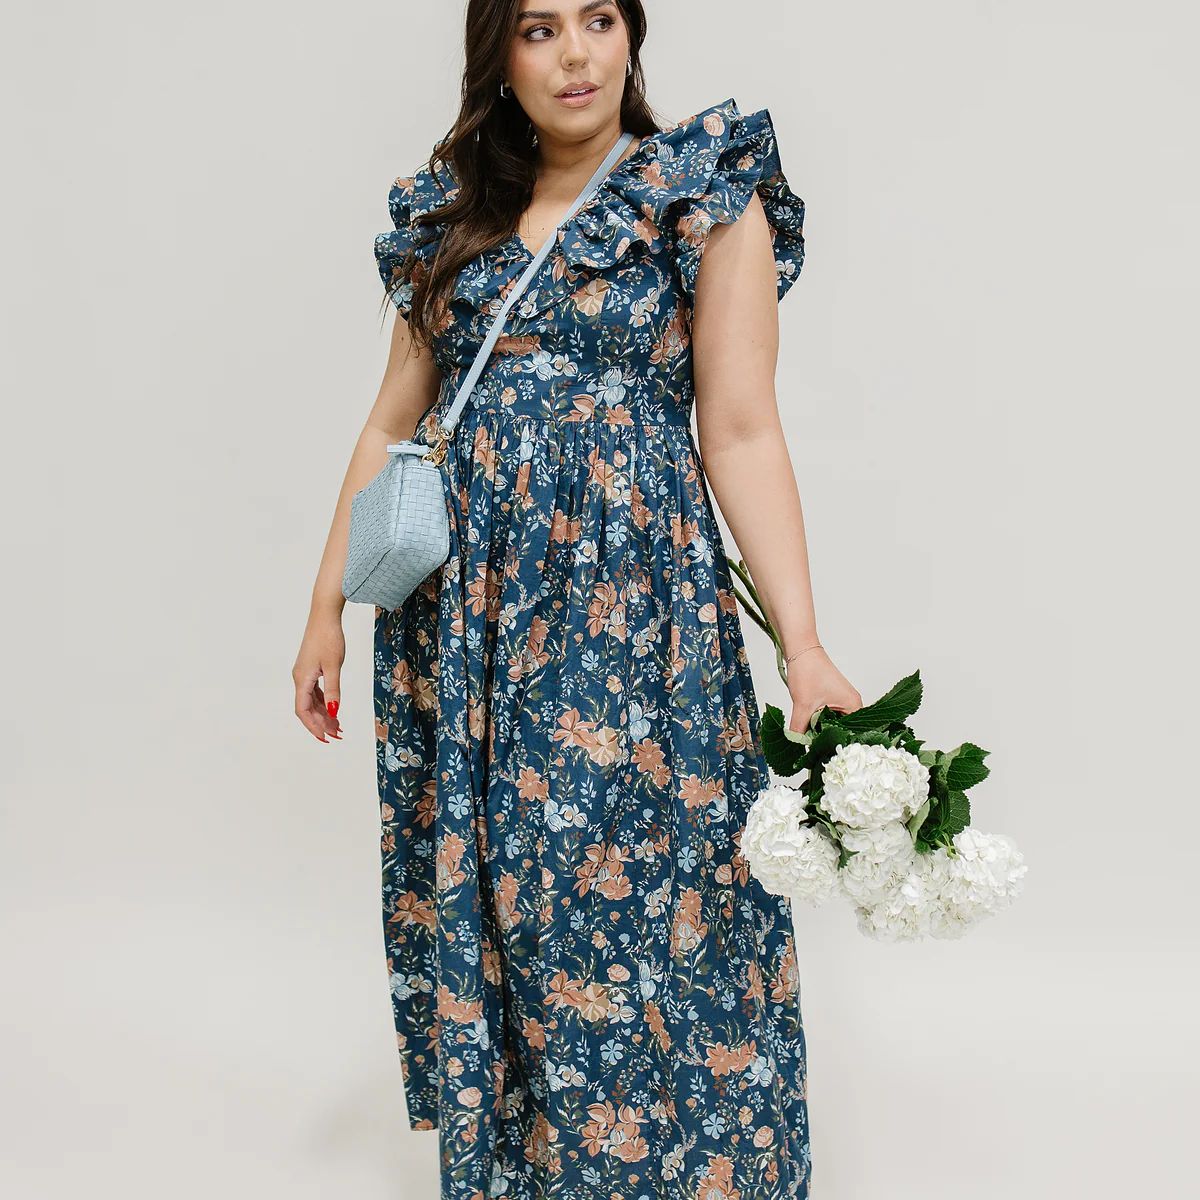 Stockplace The Label- The Antique Blossom Dress | Stockplace